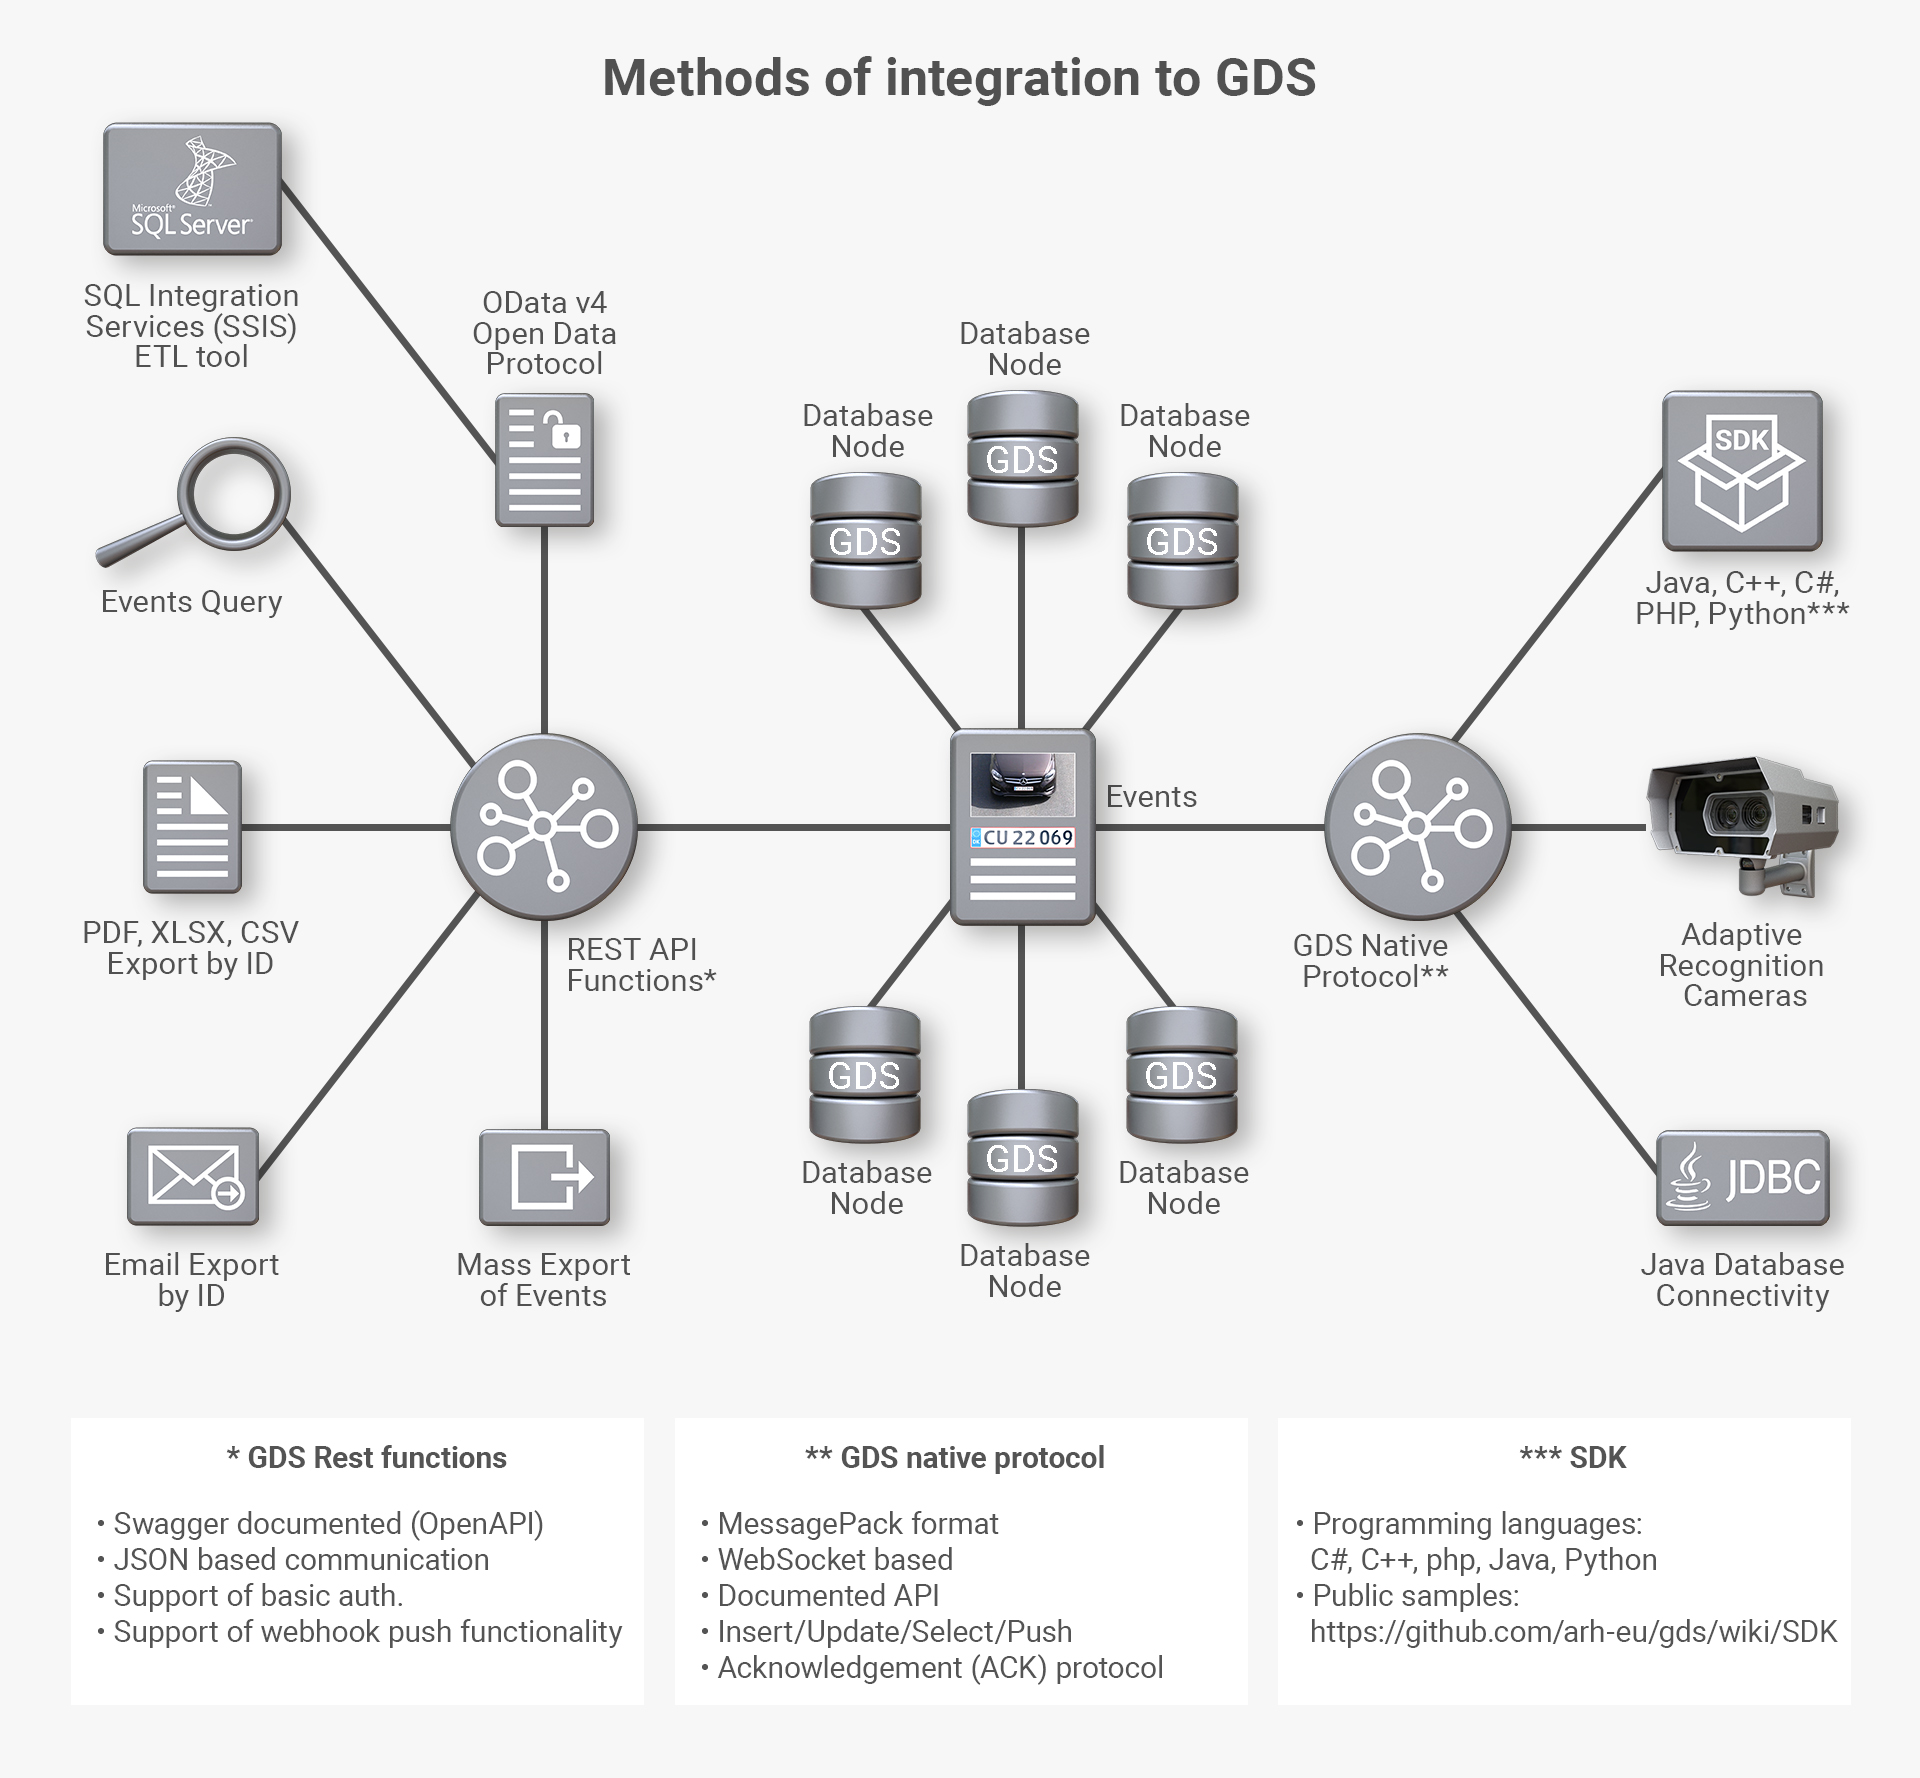 Infograph showing integration methods to the GDS data server for traffic analytics